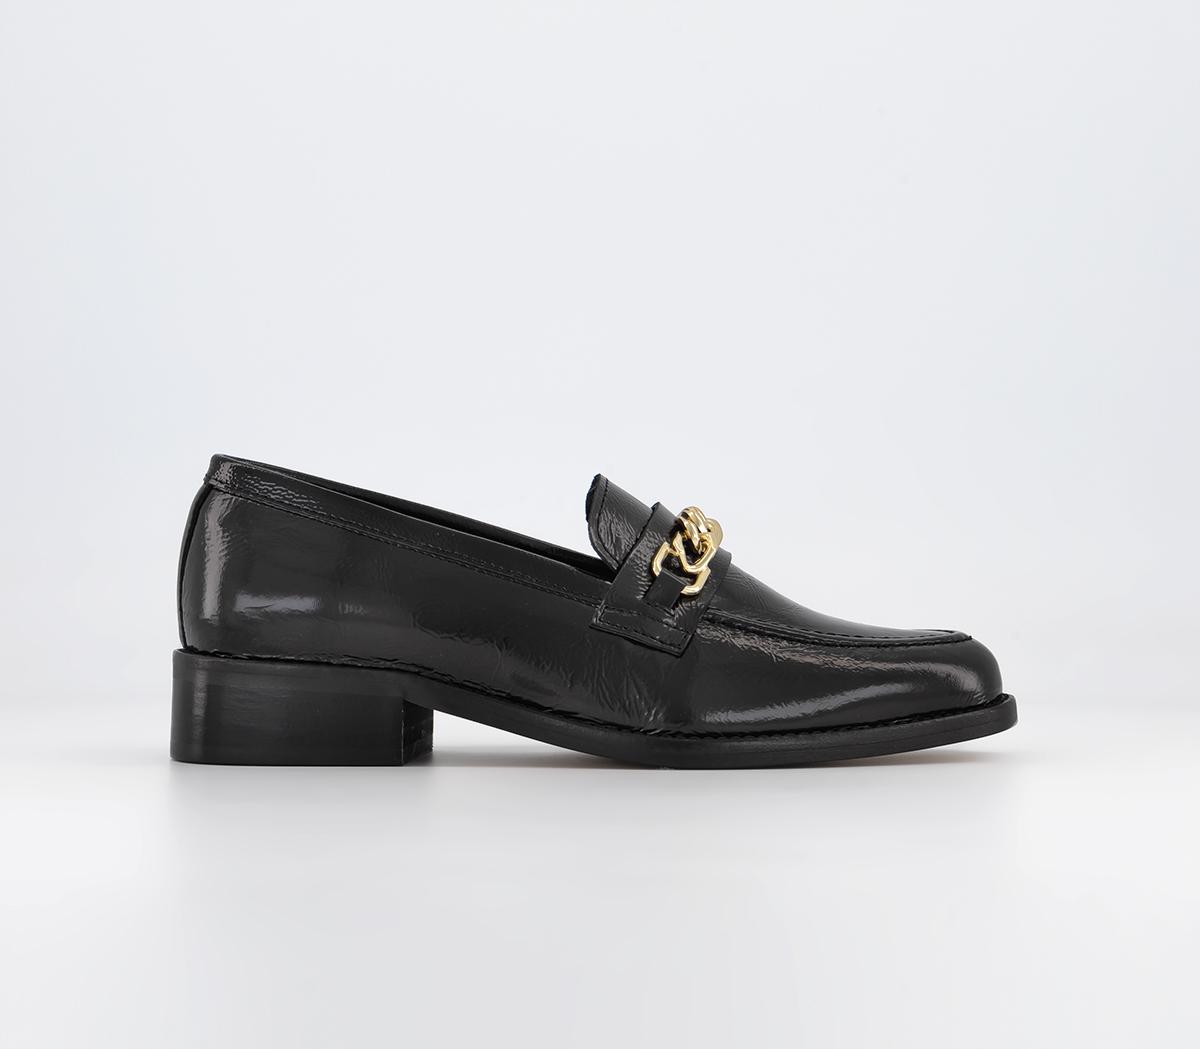 OFFICE Fargo Spain Chain Loafers Black Leather - Flat Shoes for Women